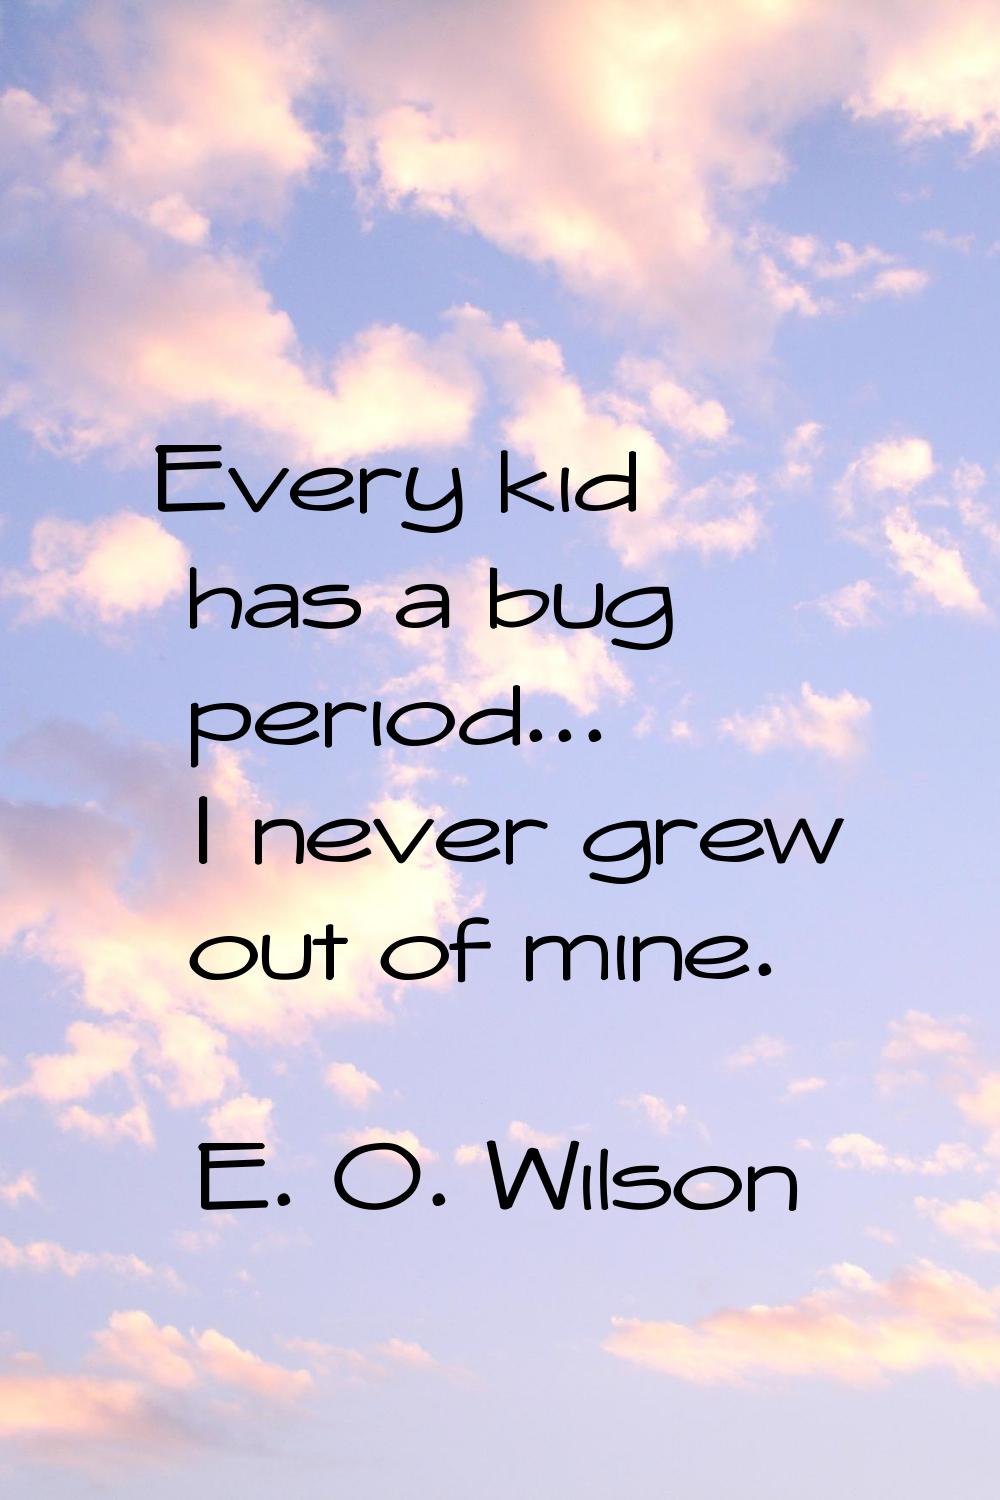 Every kid has a bug period... I never grew out of mine.